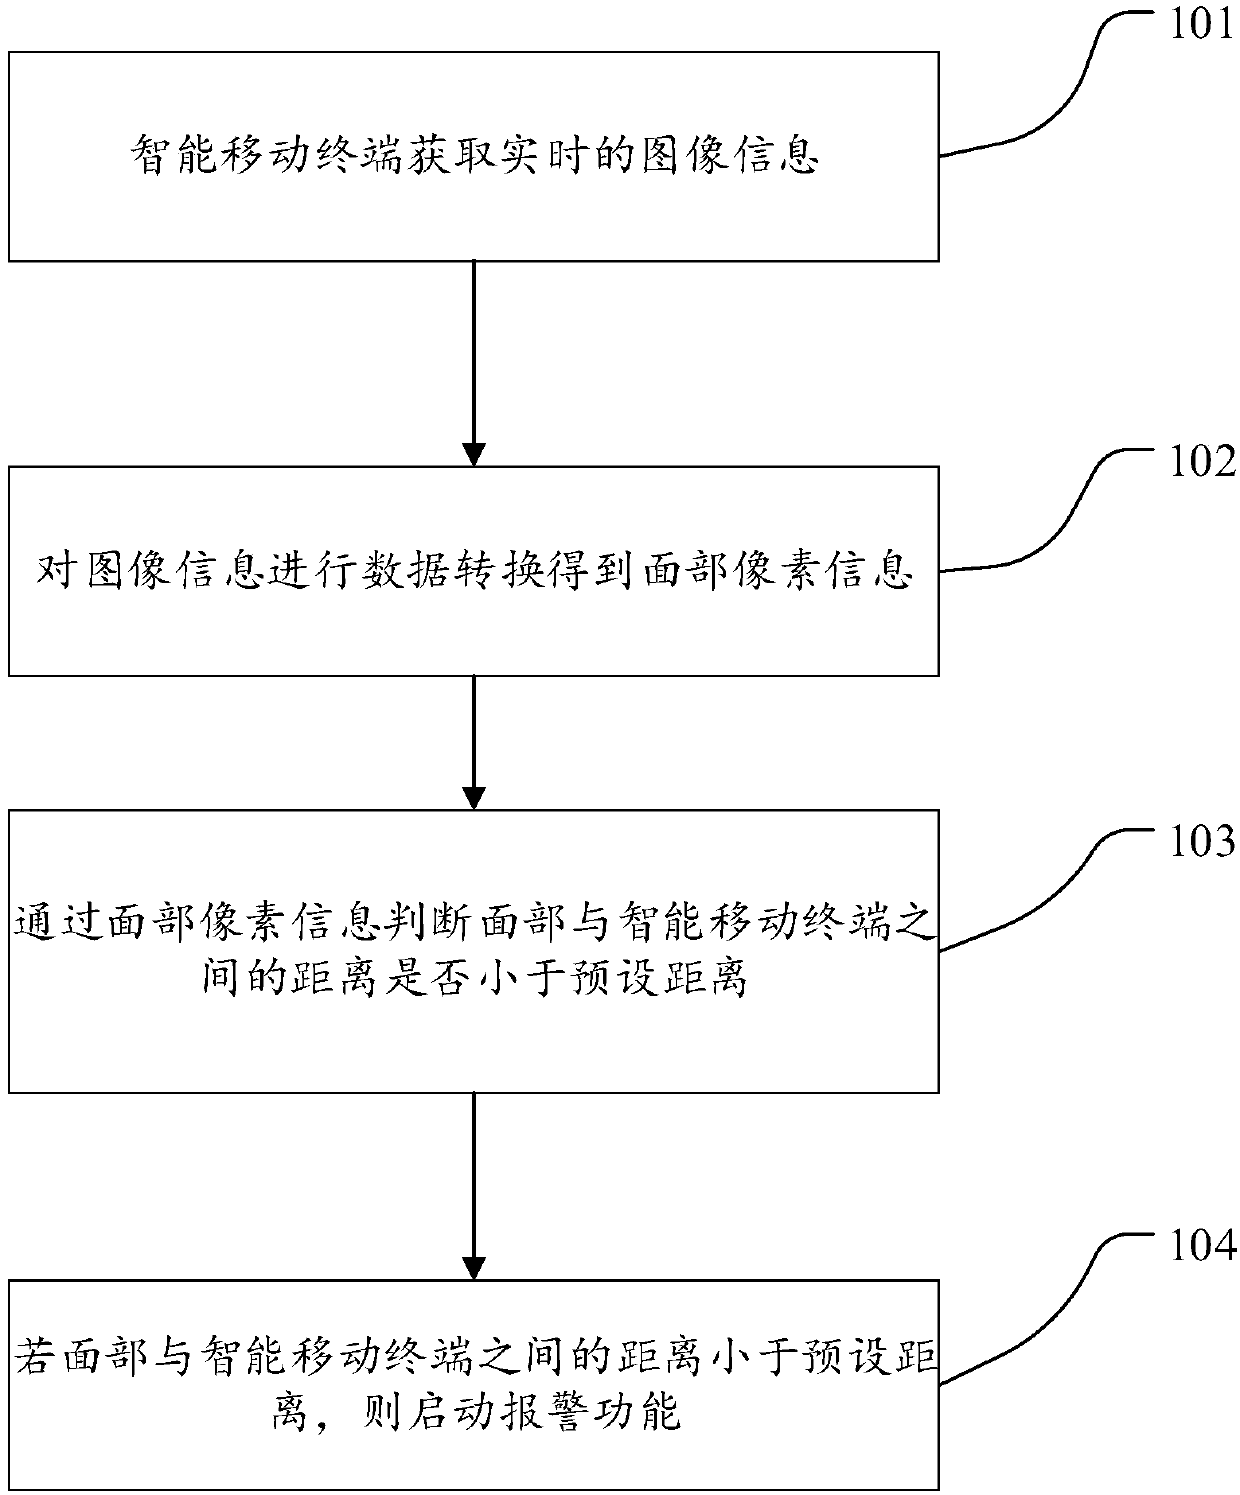 Intelligent mobile terminal, eye protection method for intelligent mobile terminal, and apparatus with storage function